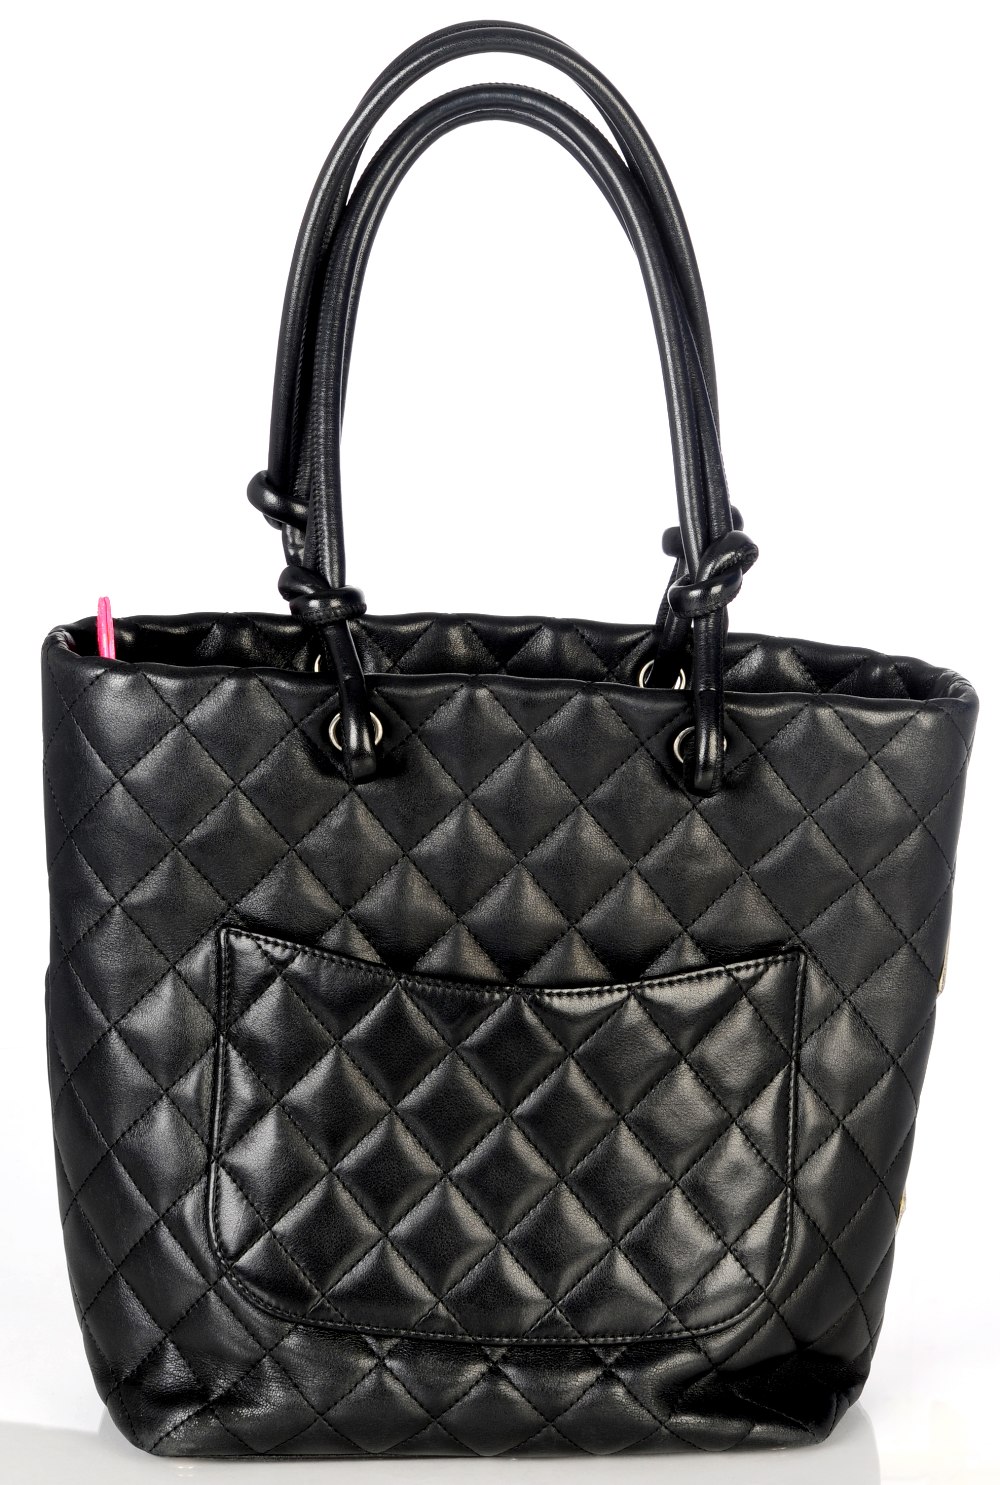 CHANEL - a Ligne Cambon quilted tote handbag. Featuring a smooth black lambskin leather exterior - Image 2 of 5